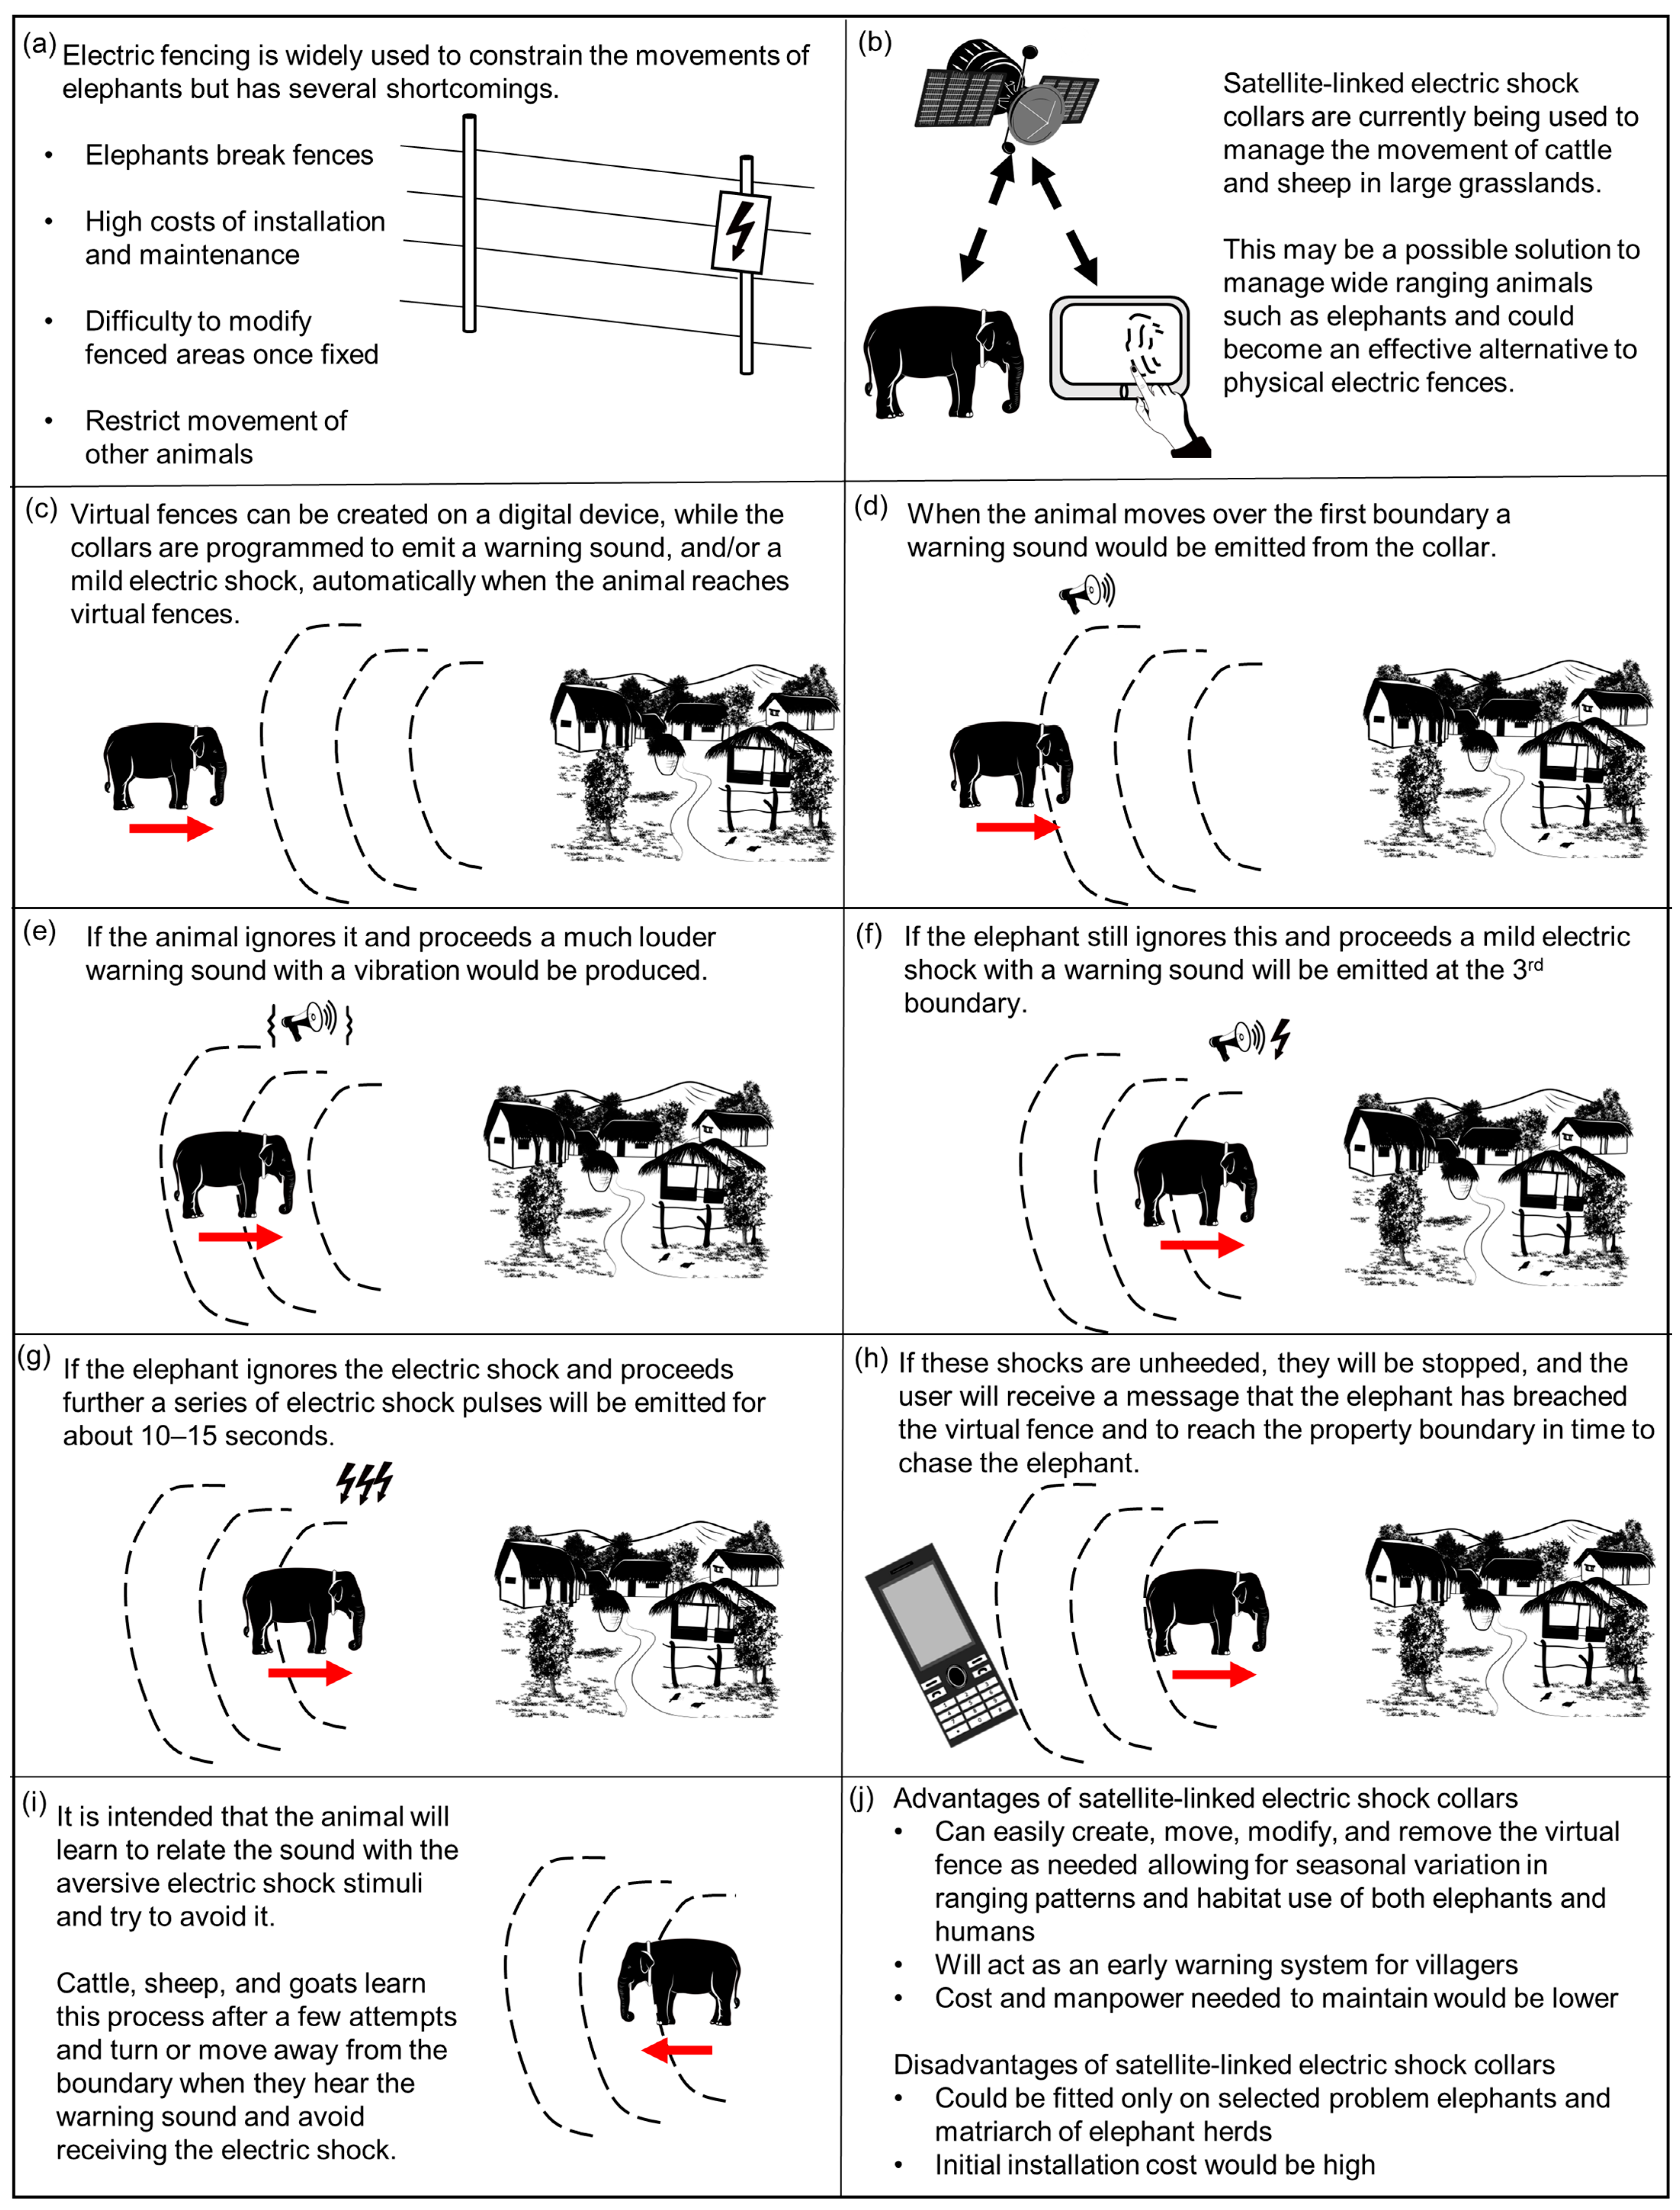 Animals | Free Full-Text | Attitudes towards the Potential Use of Aversive  Geofencing Devices to Manage Wild Elephant Movement